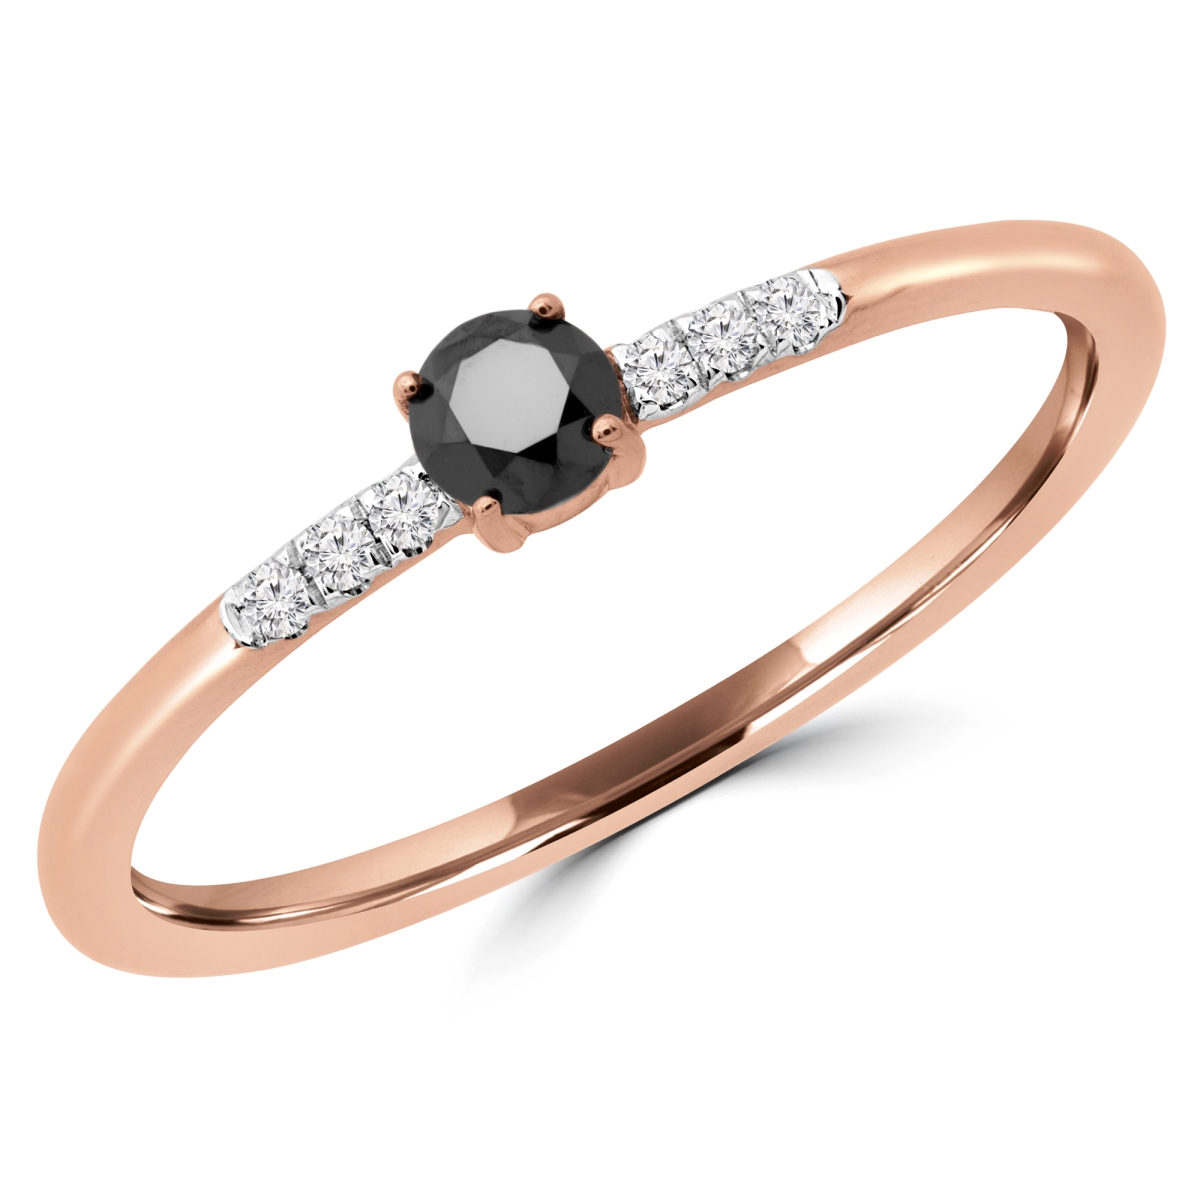 Picture of Majesty Diamonds MDR190079-6.25 0.16 CTW Round Black Diamond Bezel Set Cocktail Ring in 14K Rose Gold - Size 6.25